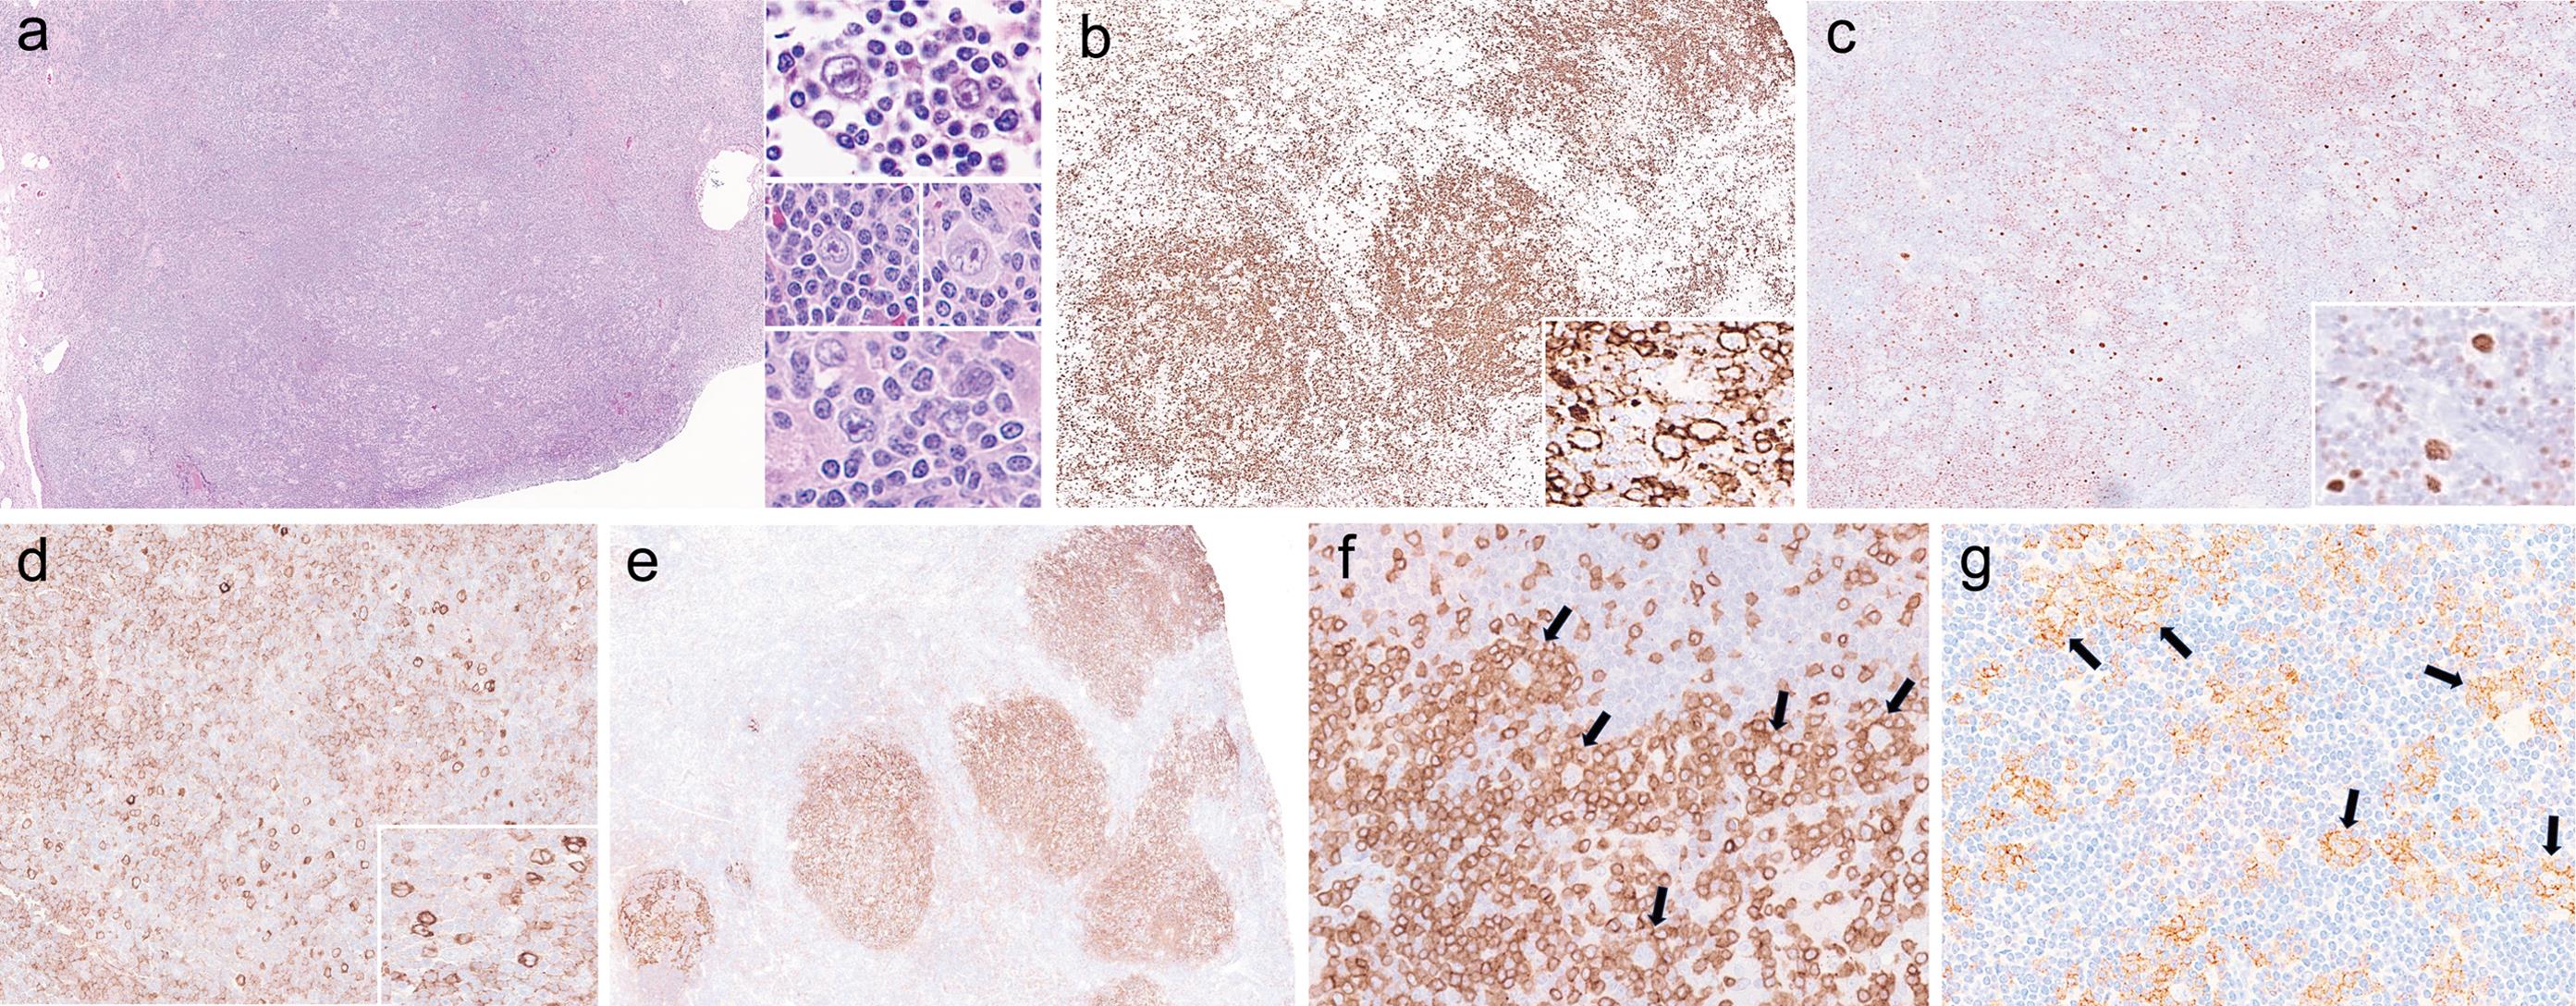 The histologic and immunohistochemical features of NLP.